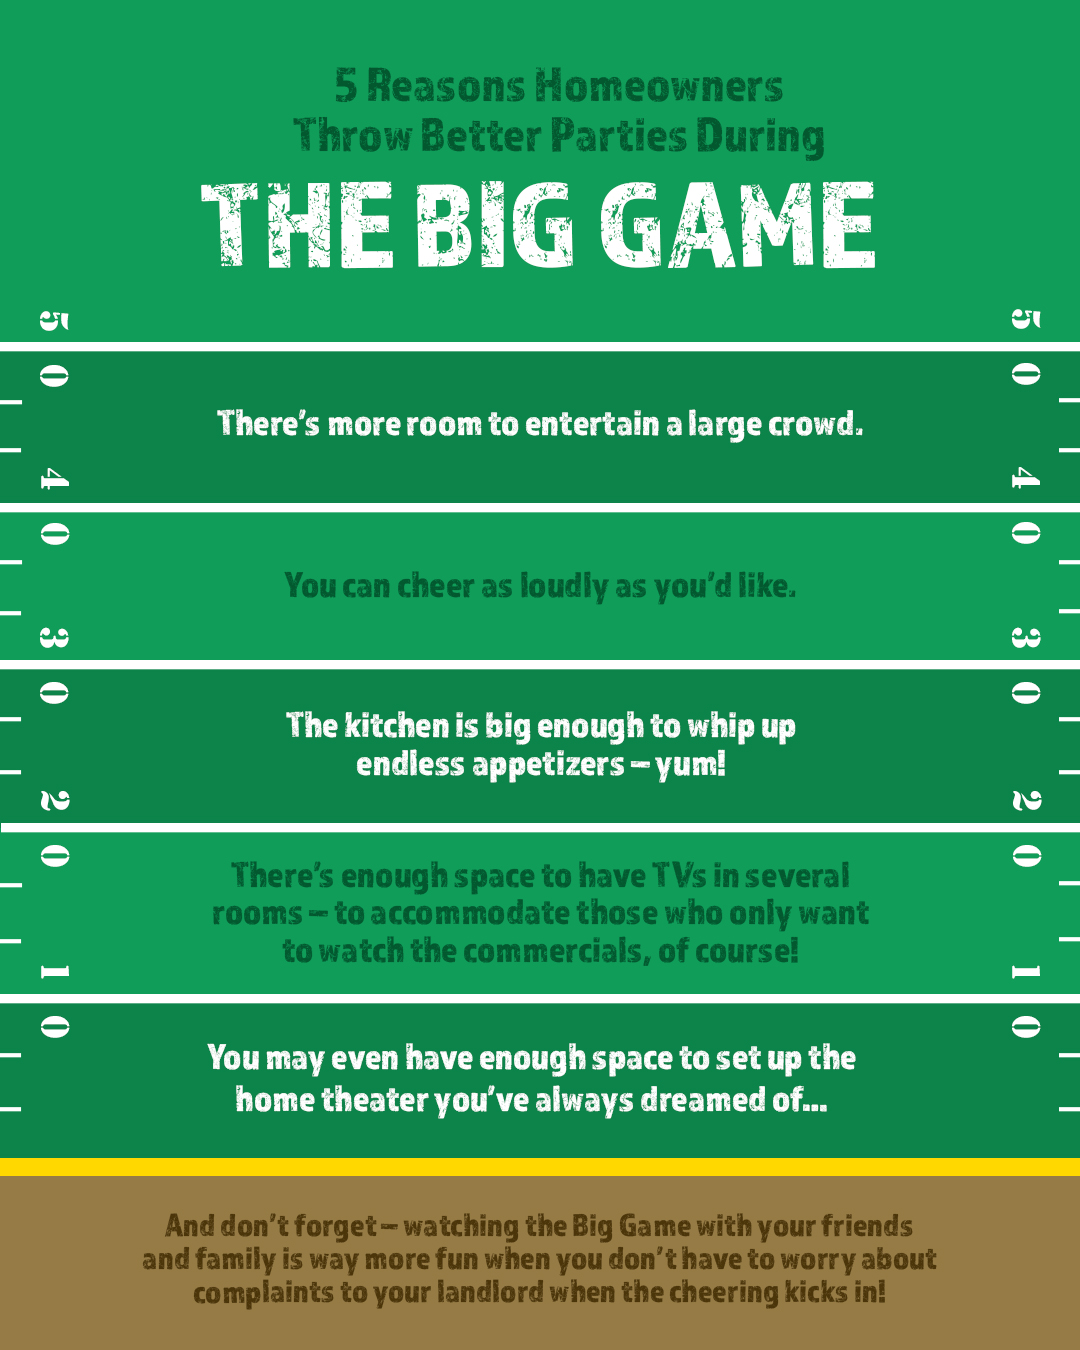 5 Reasons Homeowners Throw Better Parties During the Big Game [INFOGRAPHIC] | Simplifying The Market